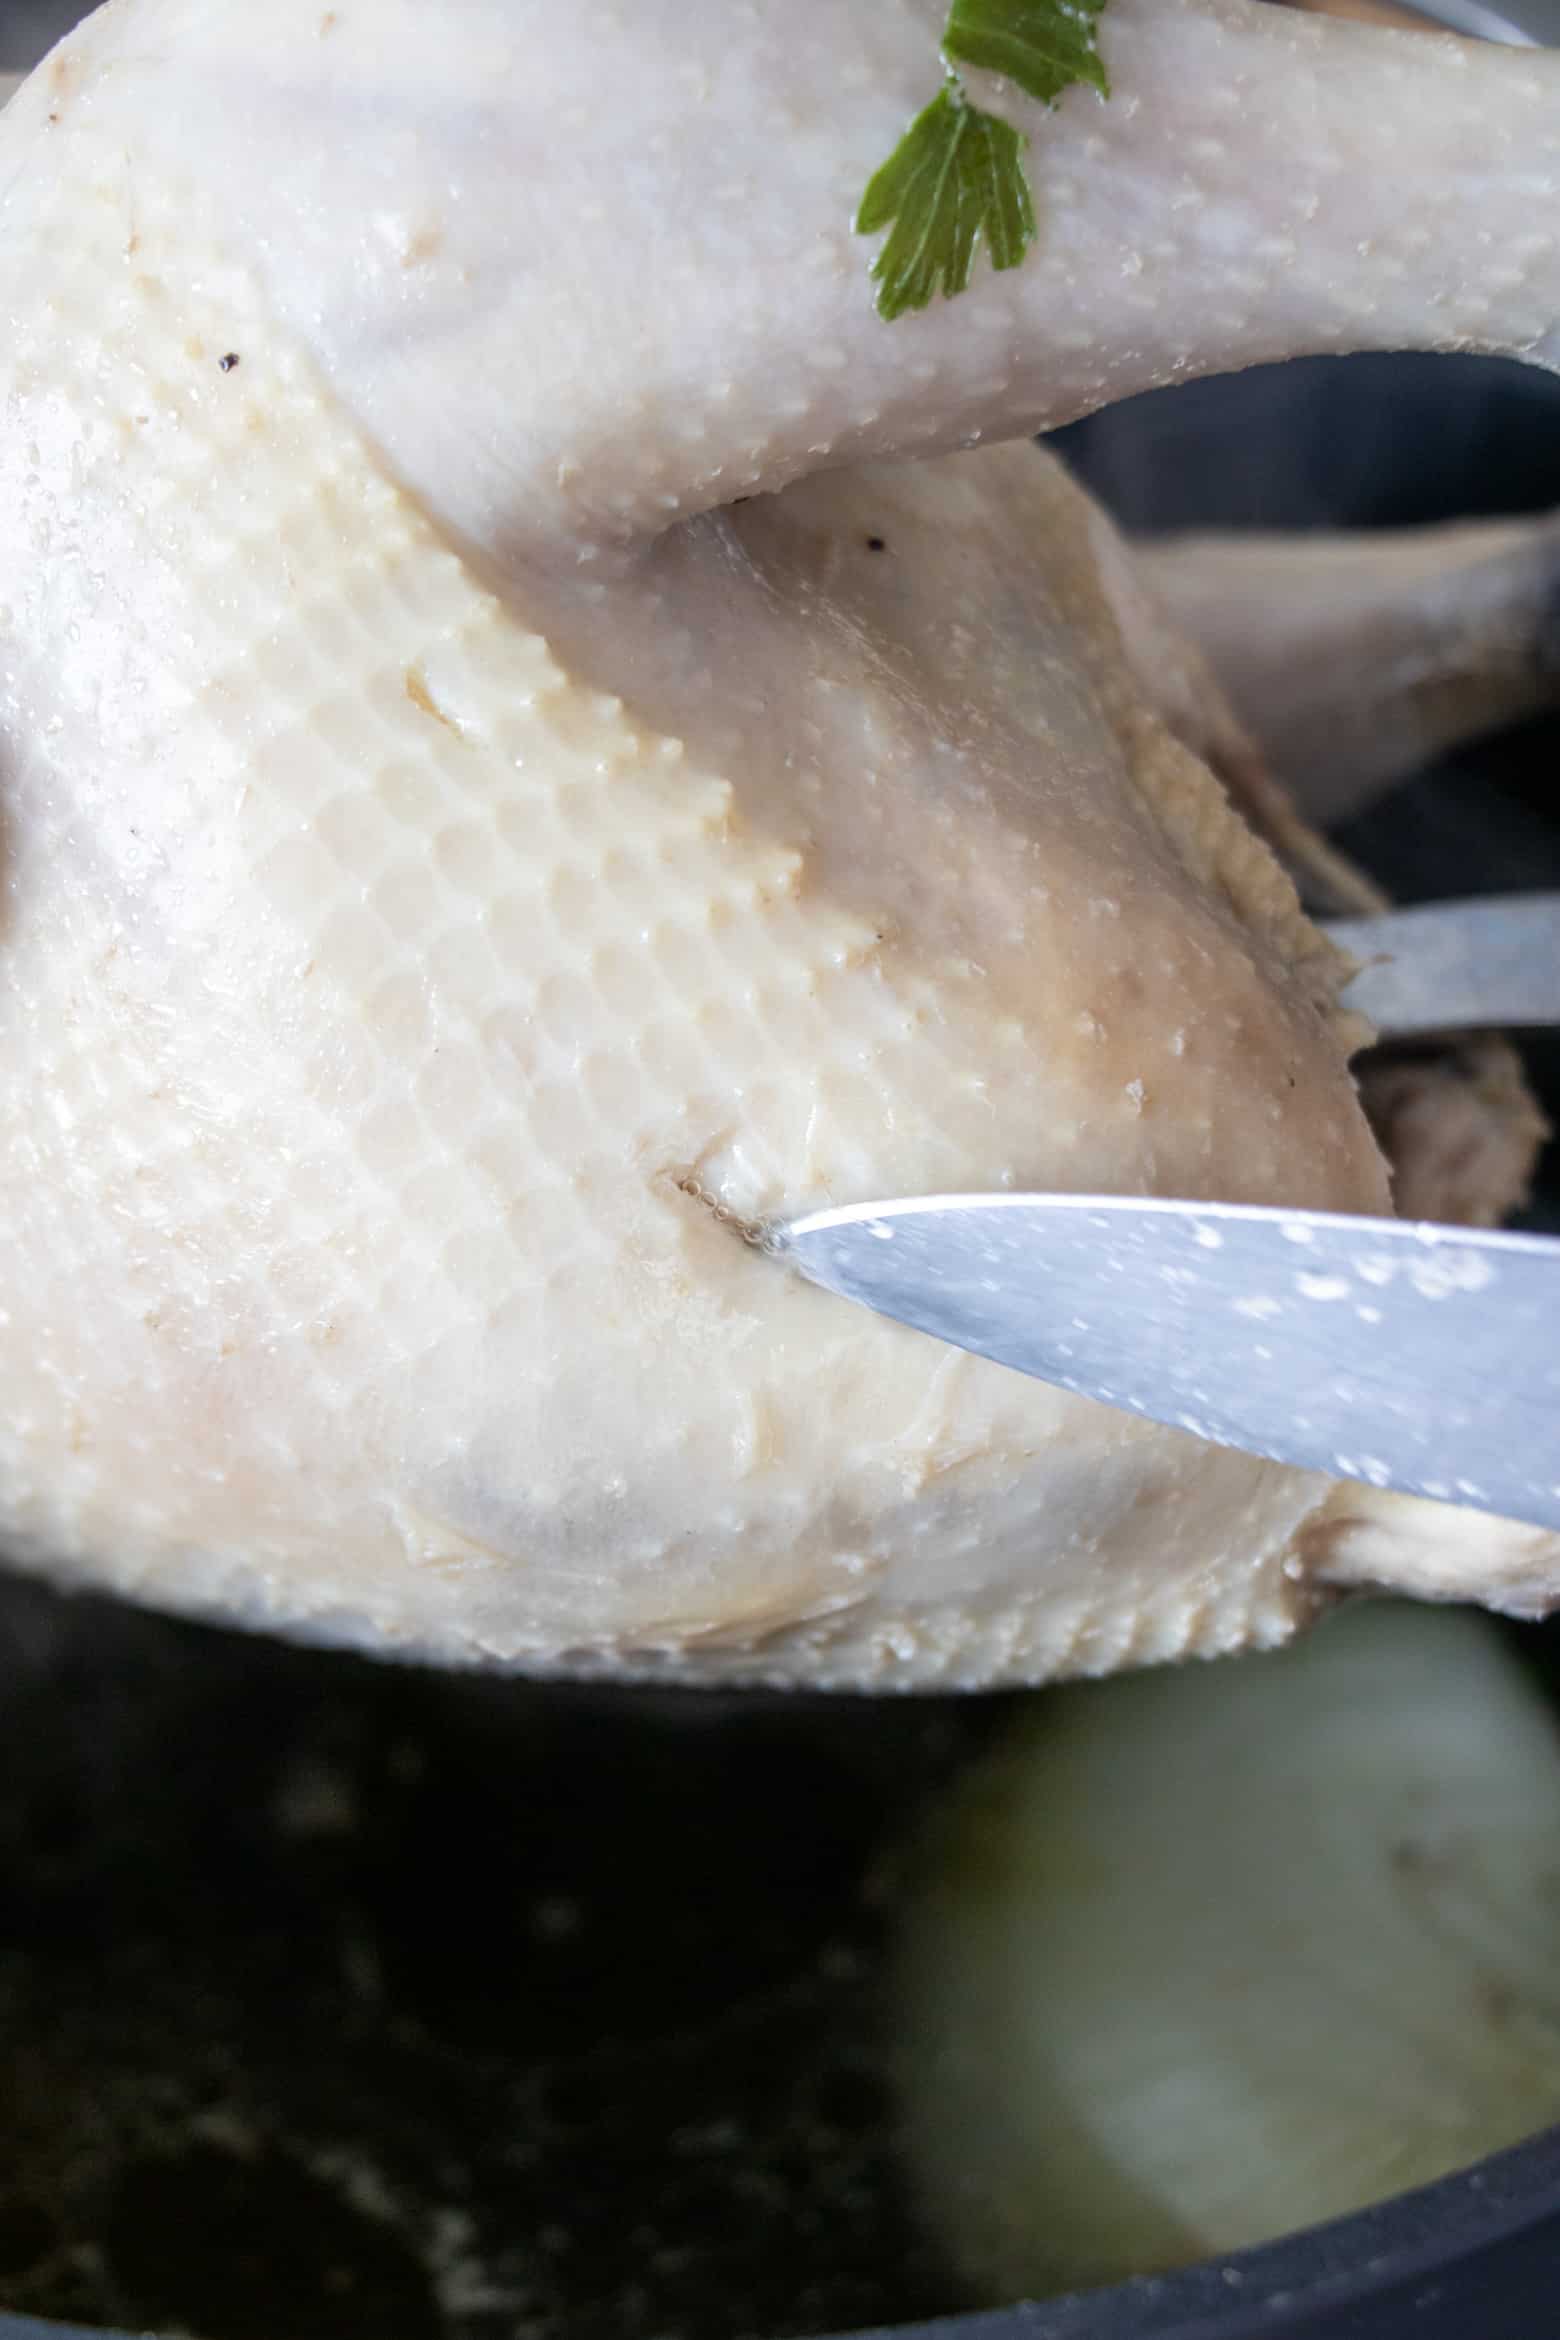 Whole cooked chicken juices running clear after being pierced with a knife.